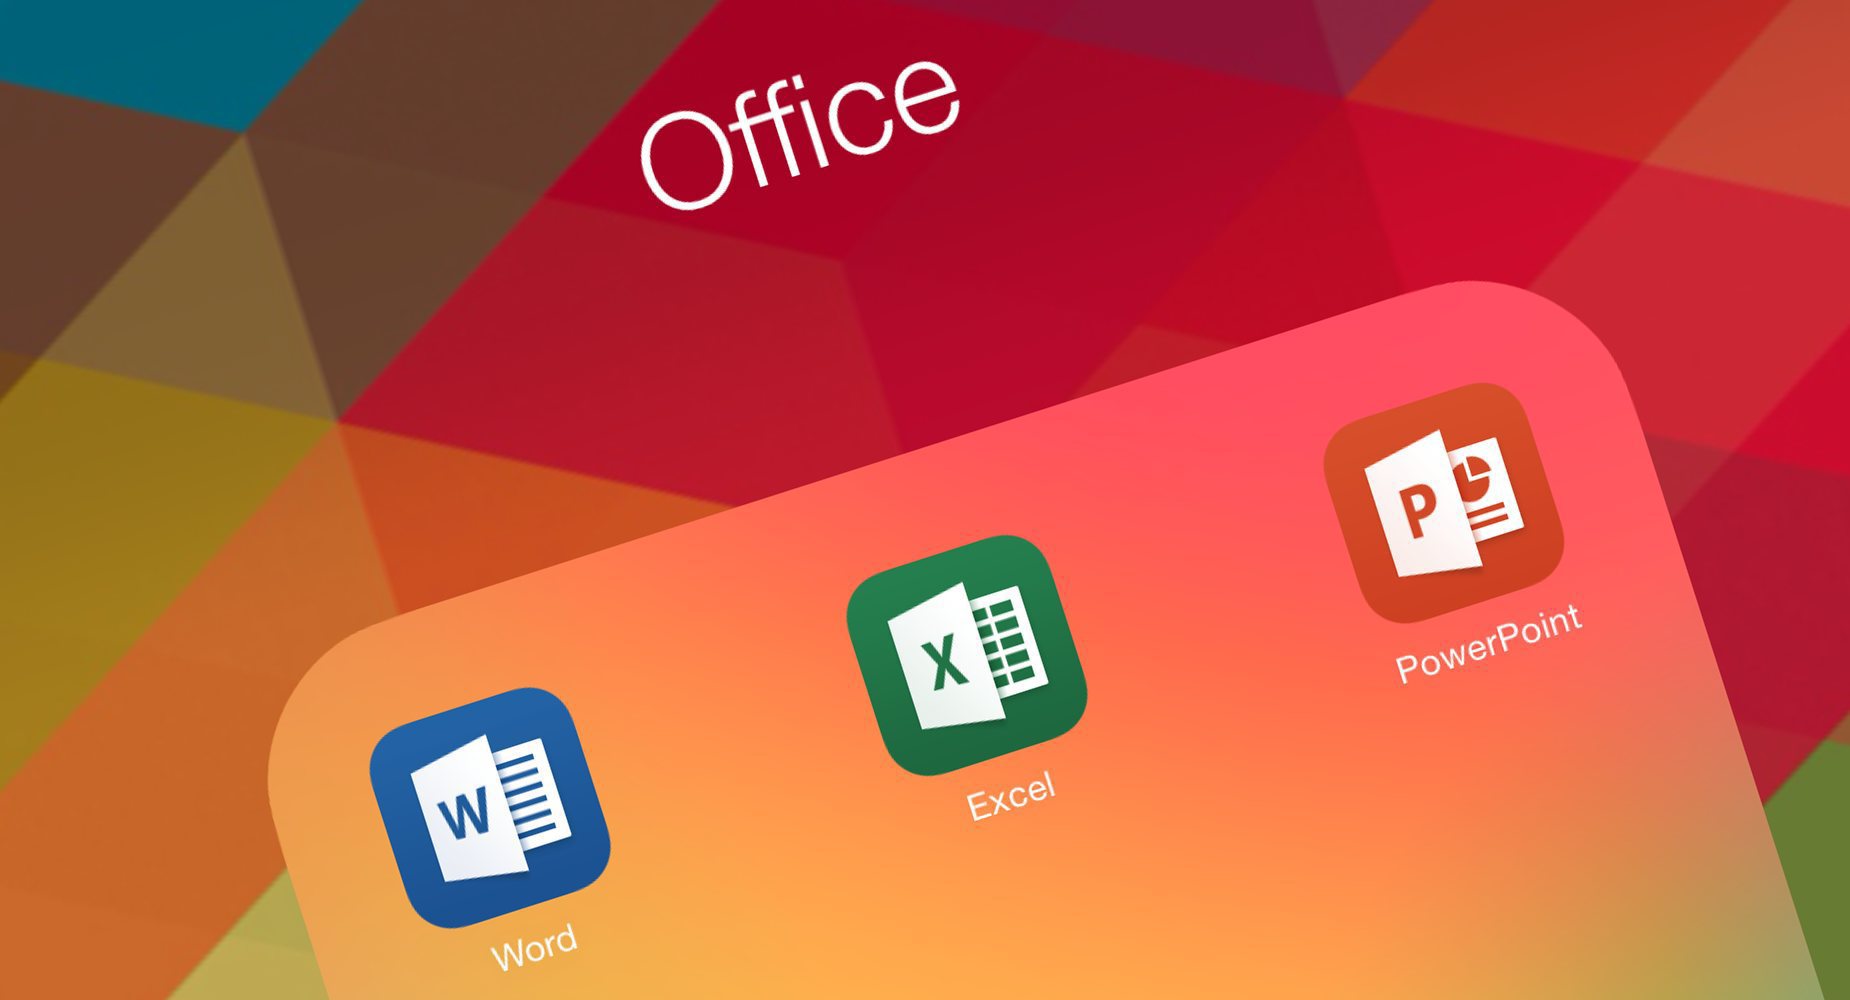 You can edit Microsoft Office documents in iOS for free